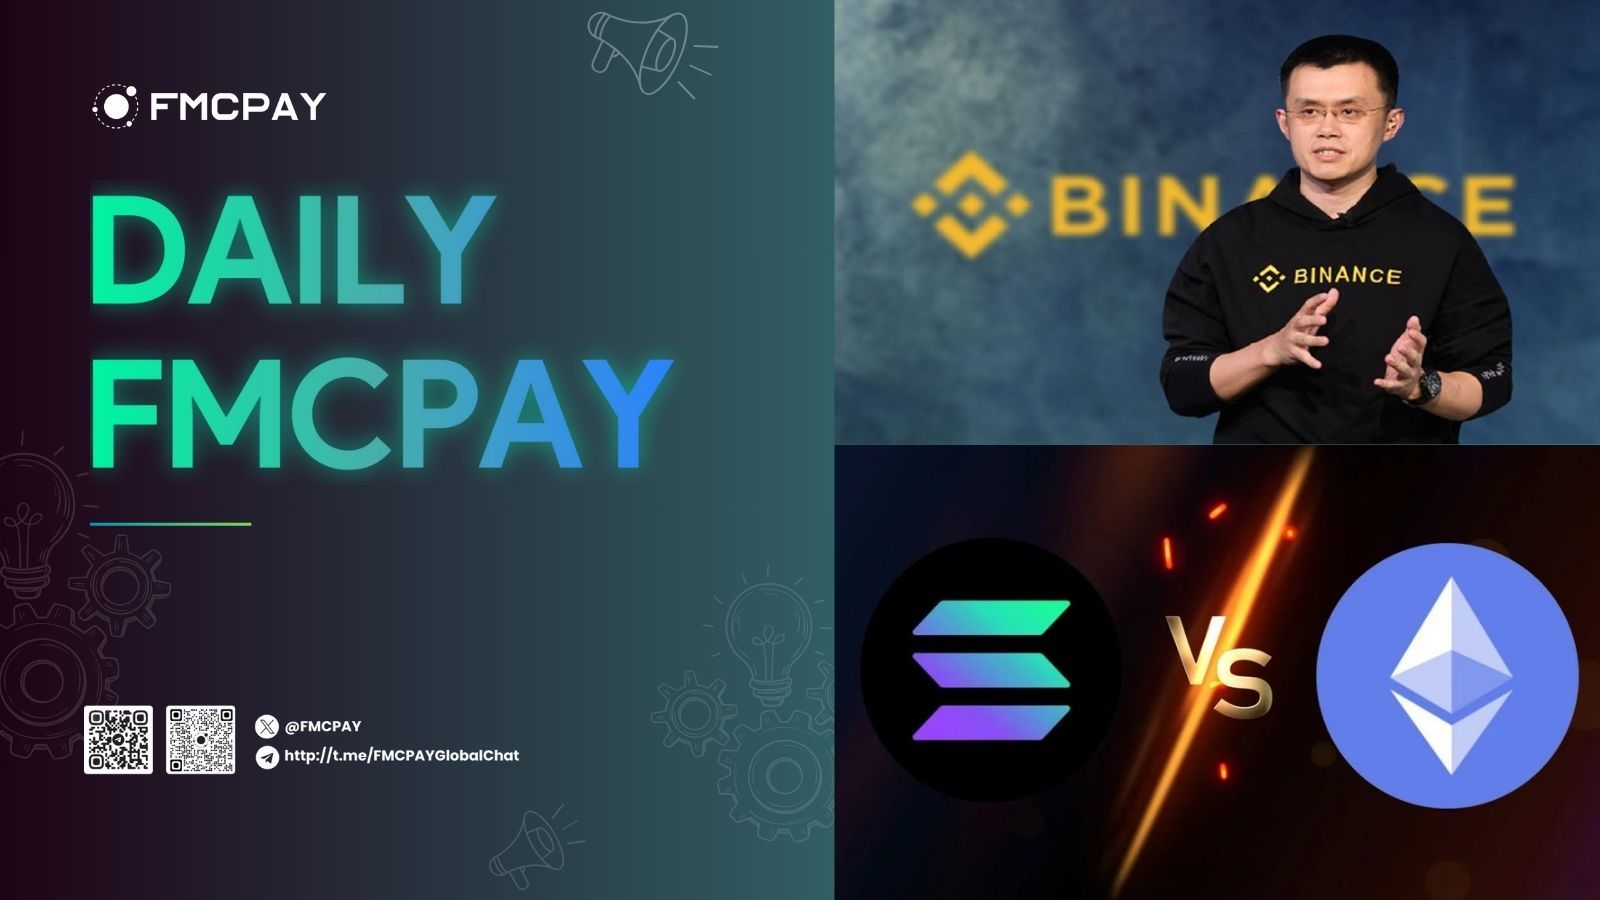 fmcpay binance founder changpeng zhao to become richest prisoner in us history